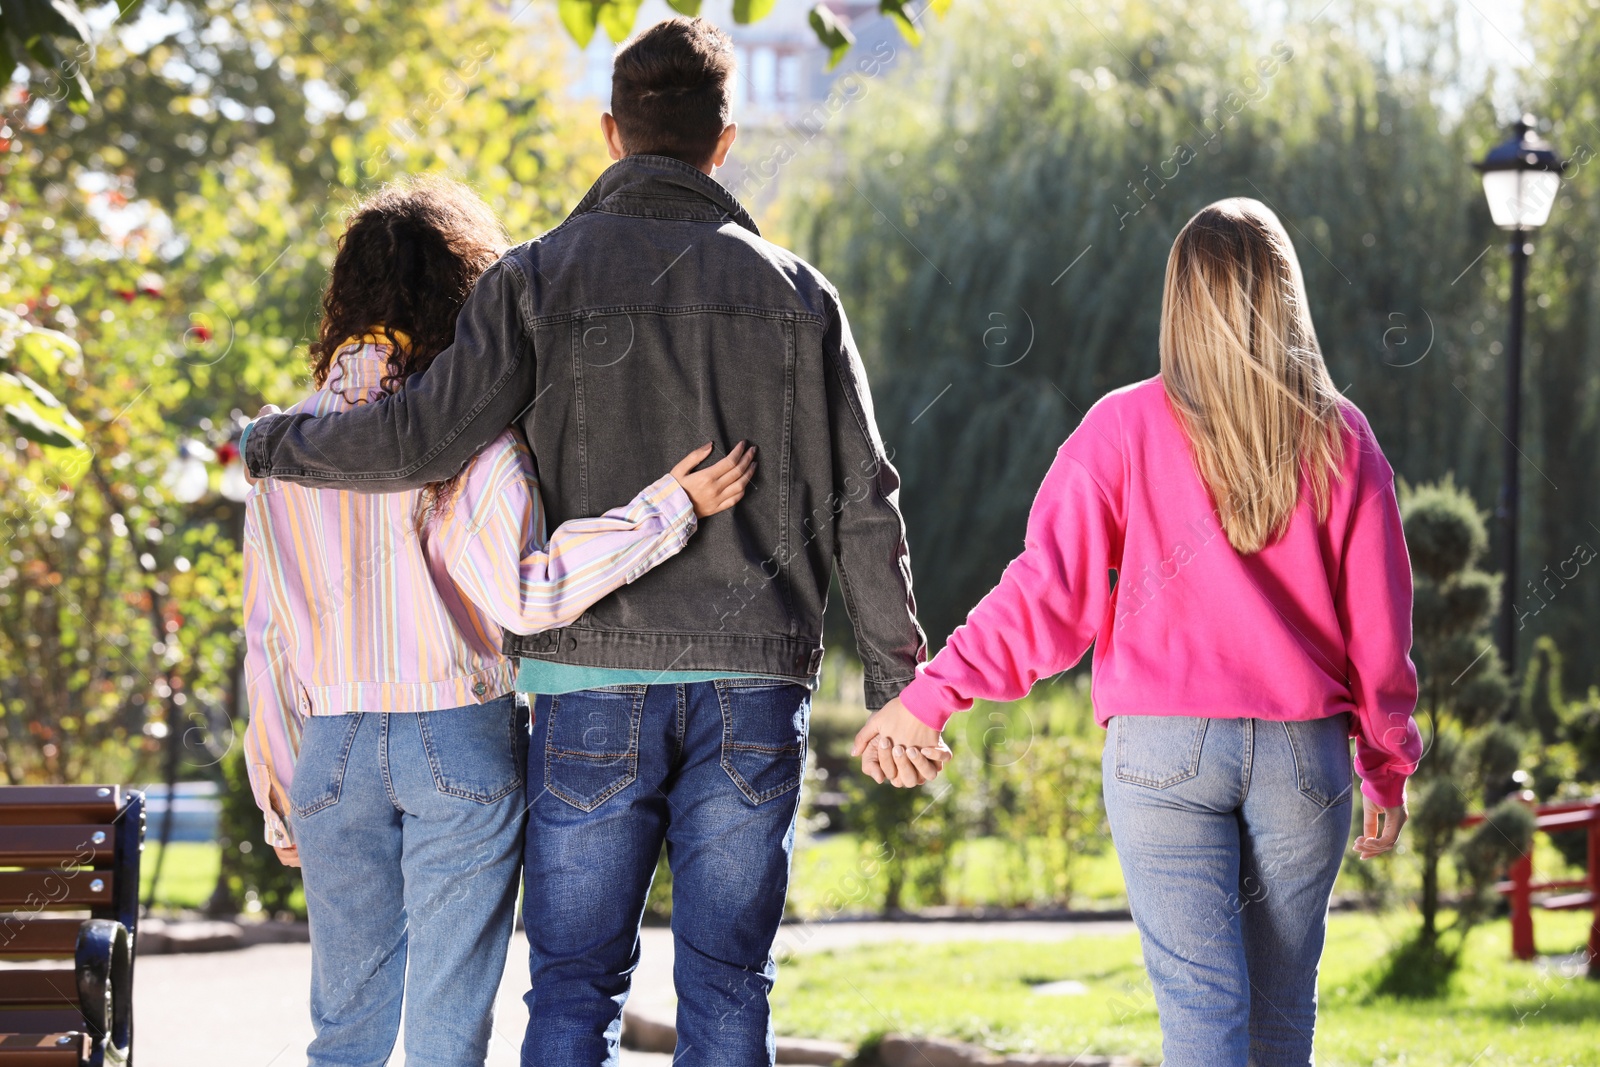 Photo of Man holding hands with another woman while hugging his girlfriend during walk in park, back view. Love triangle